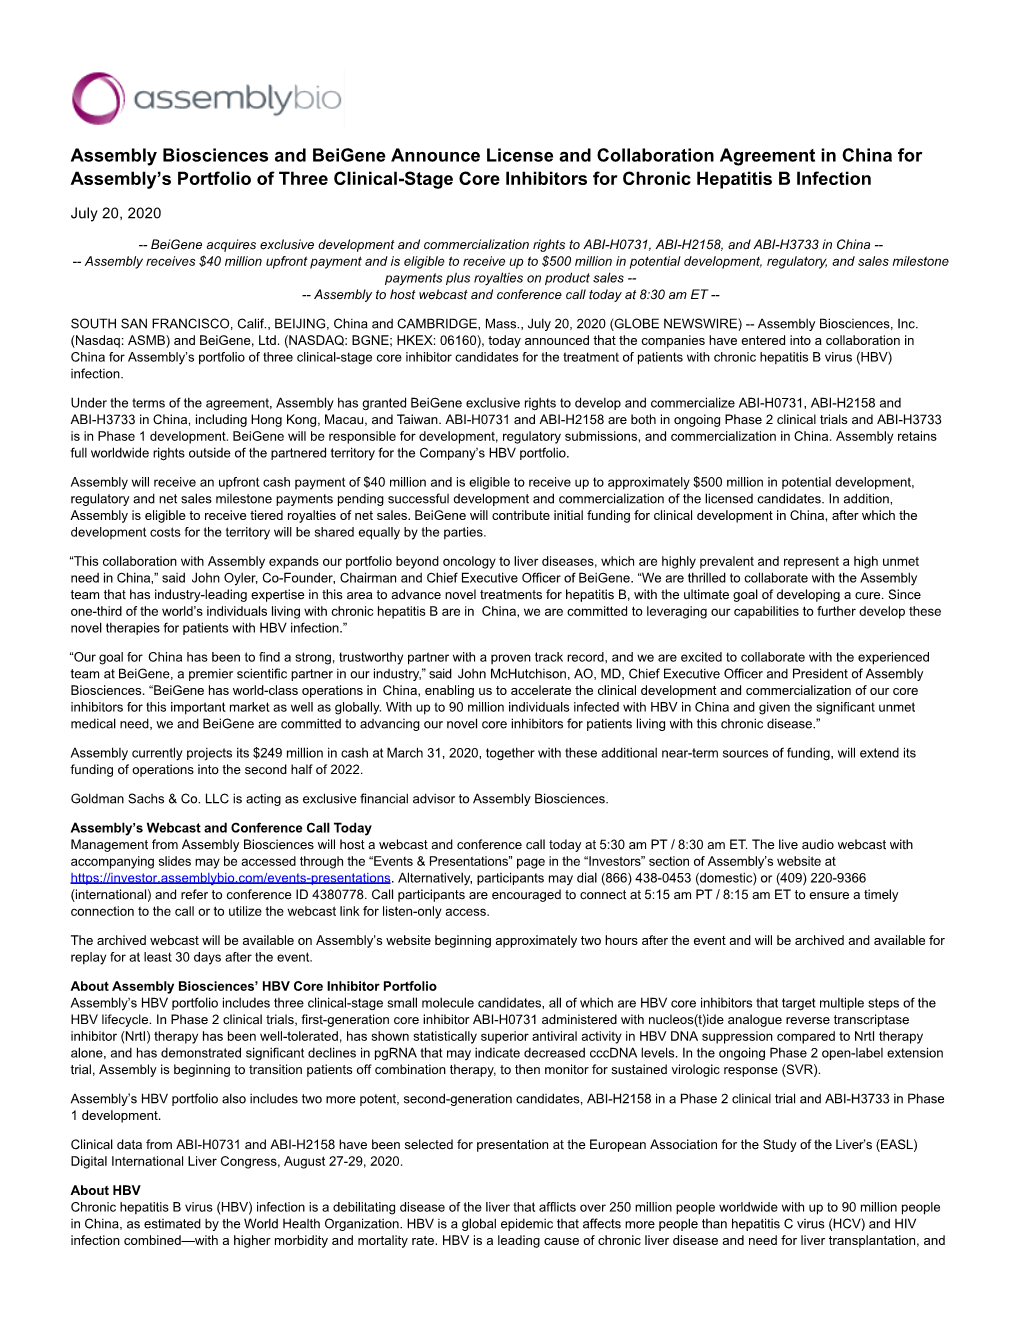 Assembly Biosciences and Beigene Announce License And